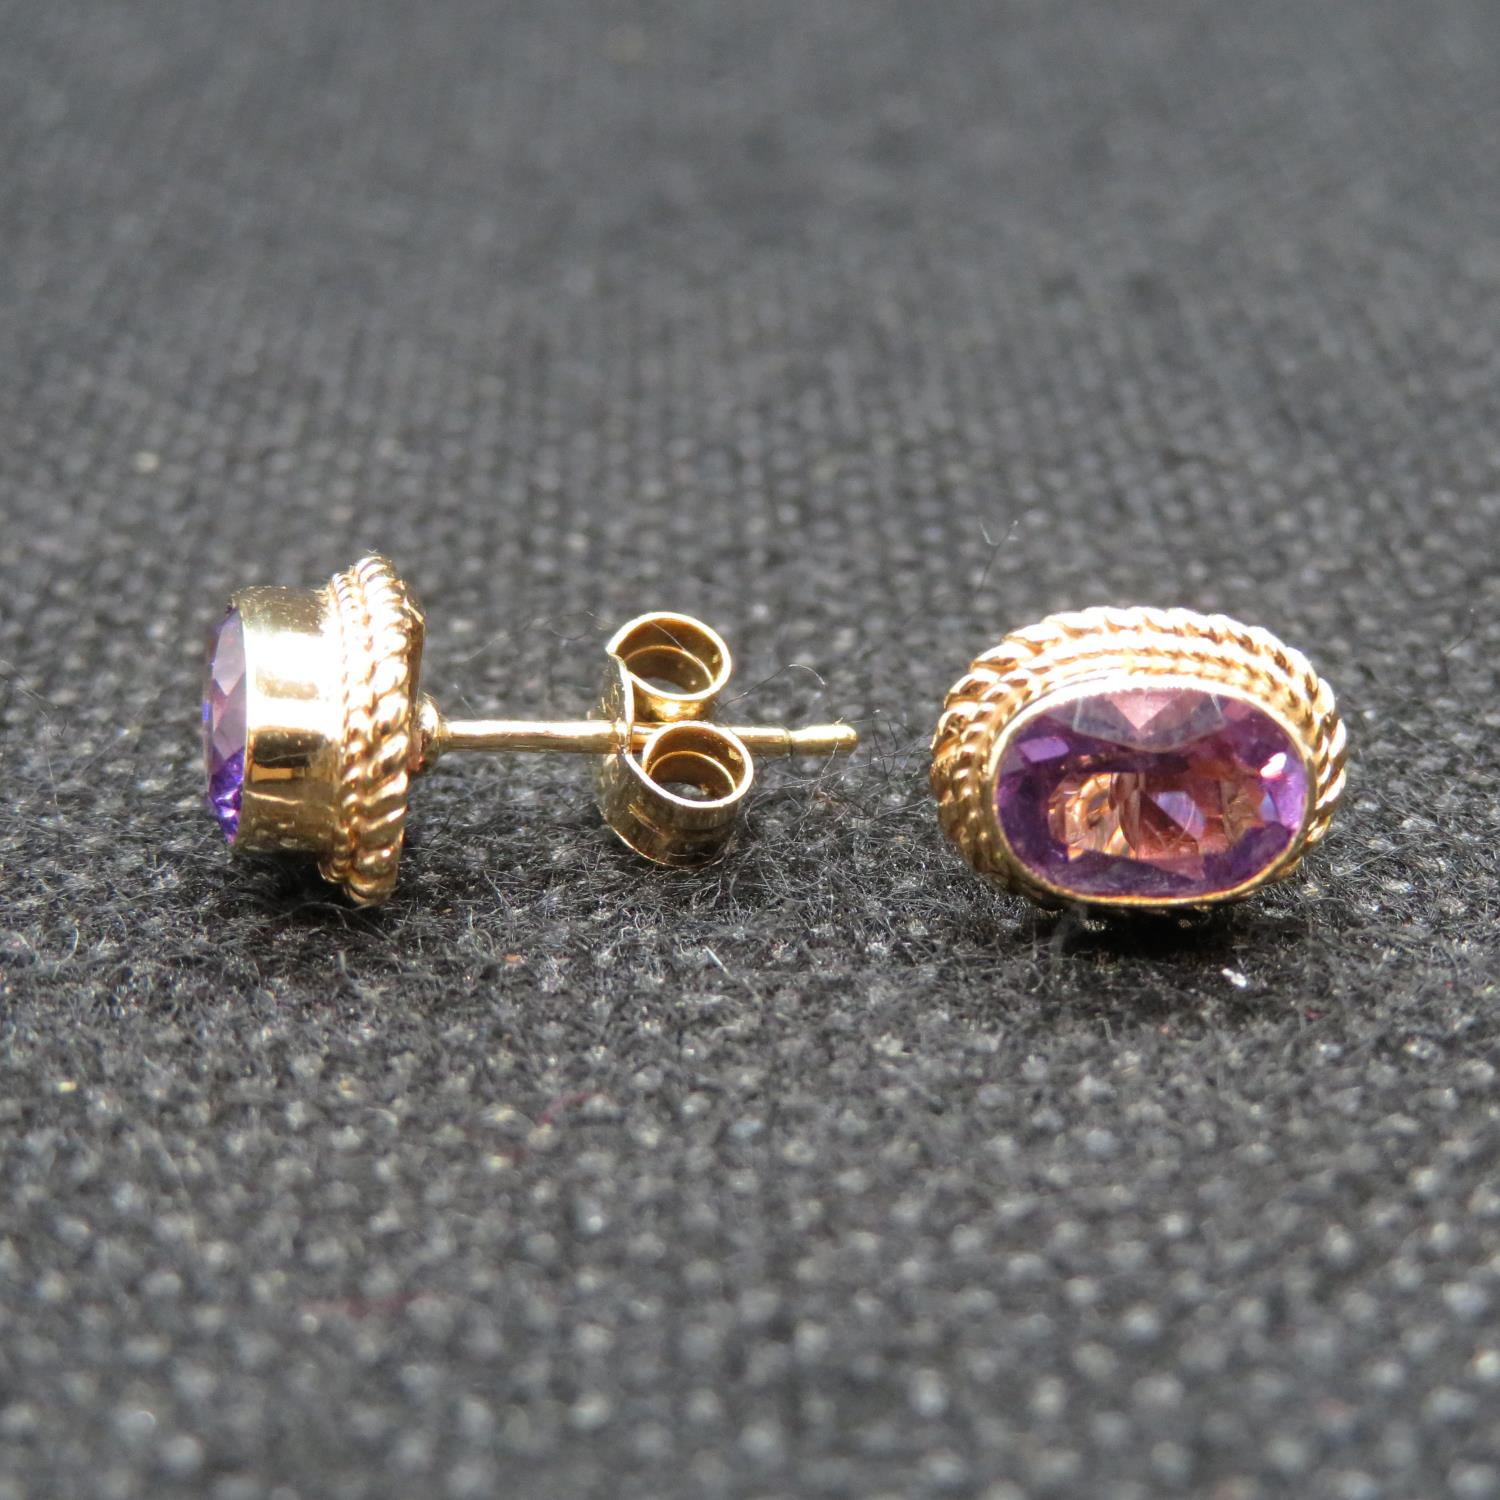 9ct gold earrings set with oval amethyst stones - Image 2 of 2